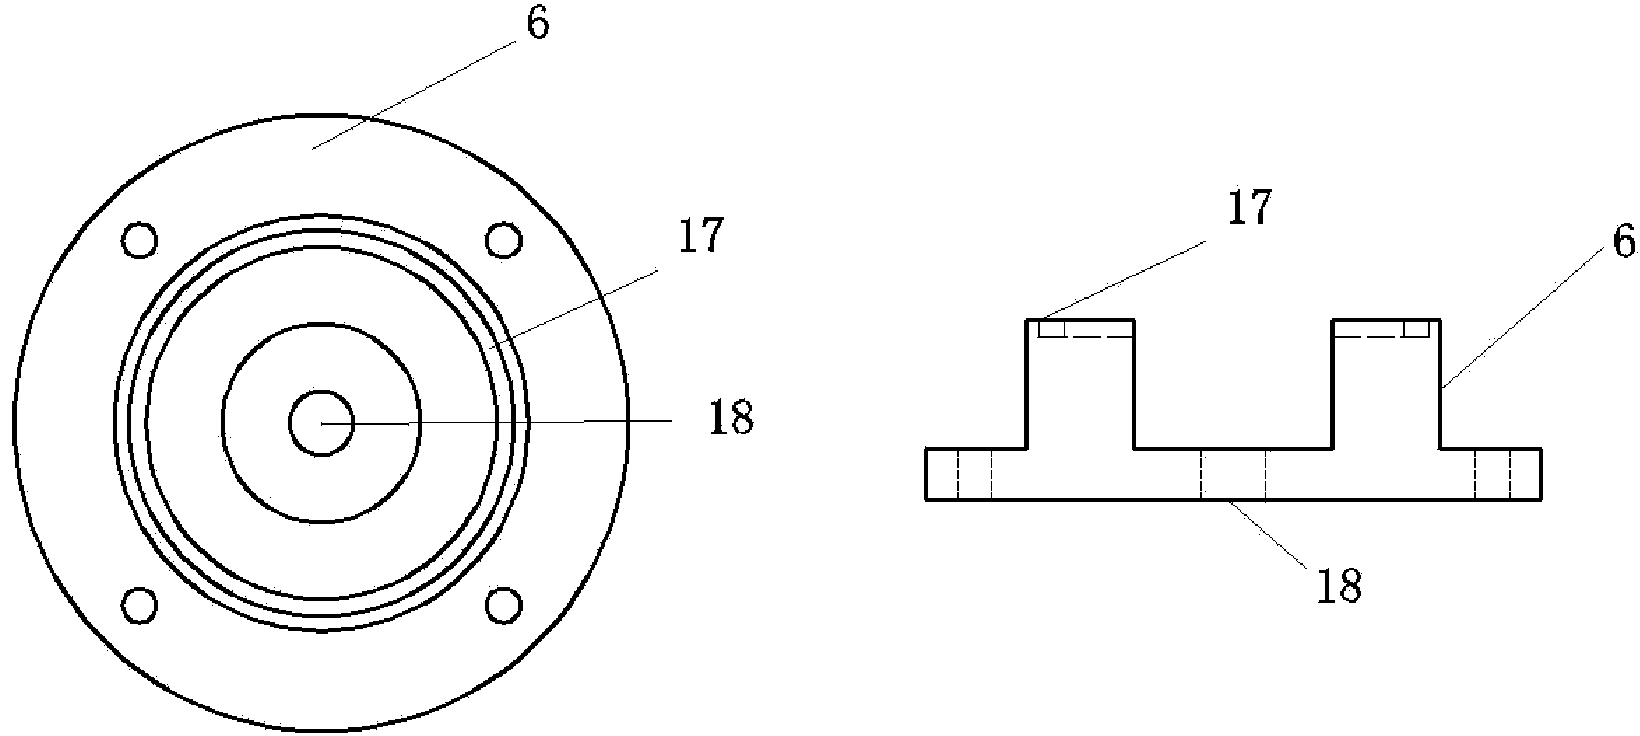 Composite corrugated pipe forming device based on electromagnetic forming